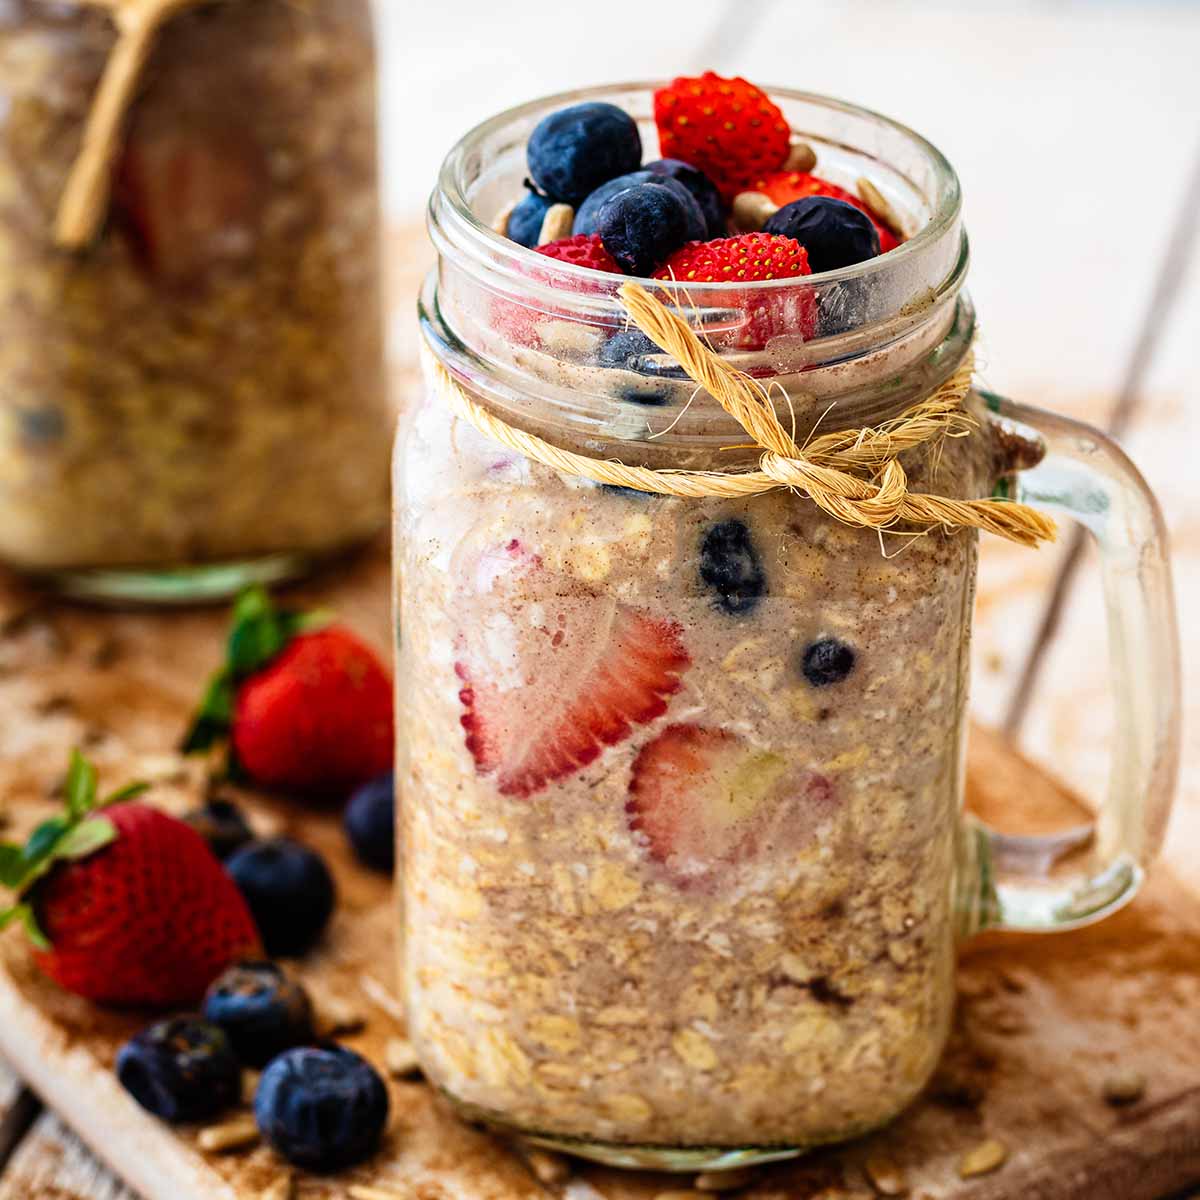 https://heavenlyhomecooking.com/wp-content/uploads/2022/07/Overnight-Oats-Without-Milk-Recipe-Featured.jpg